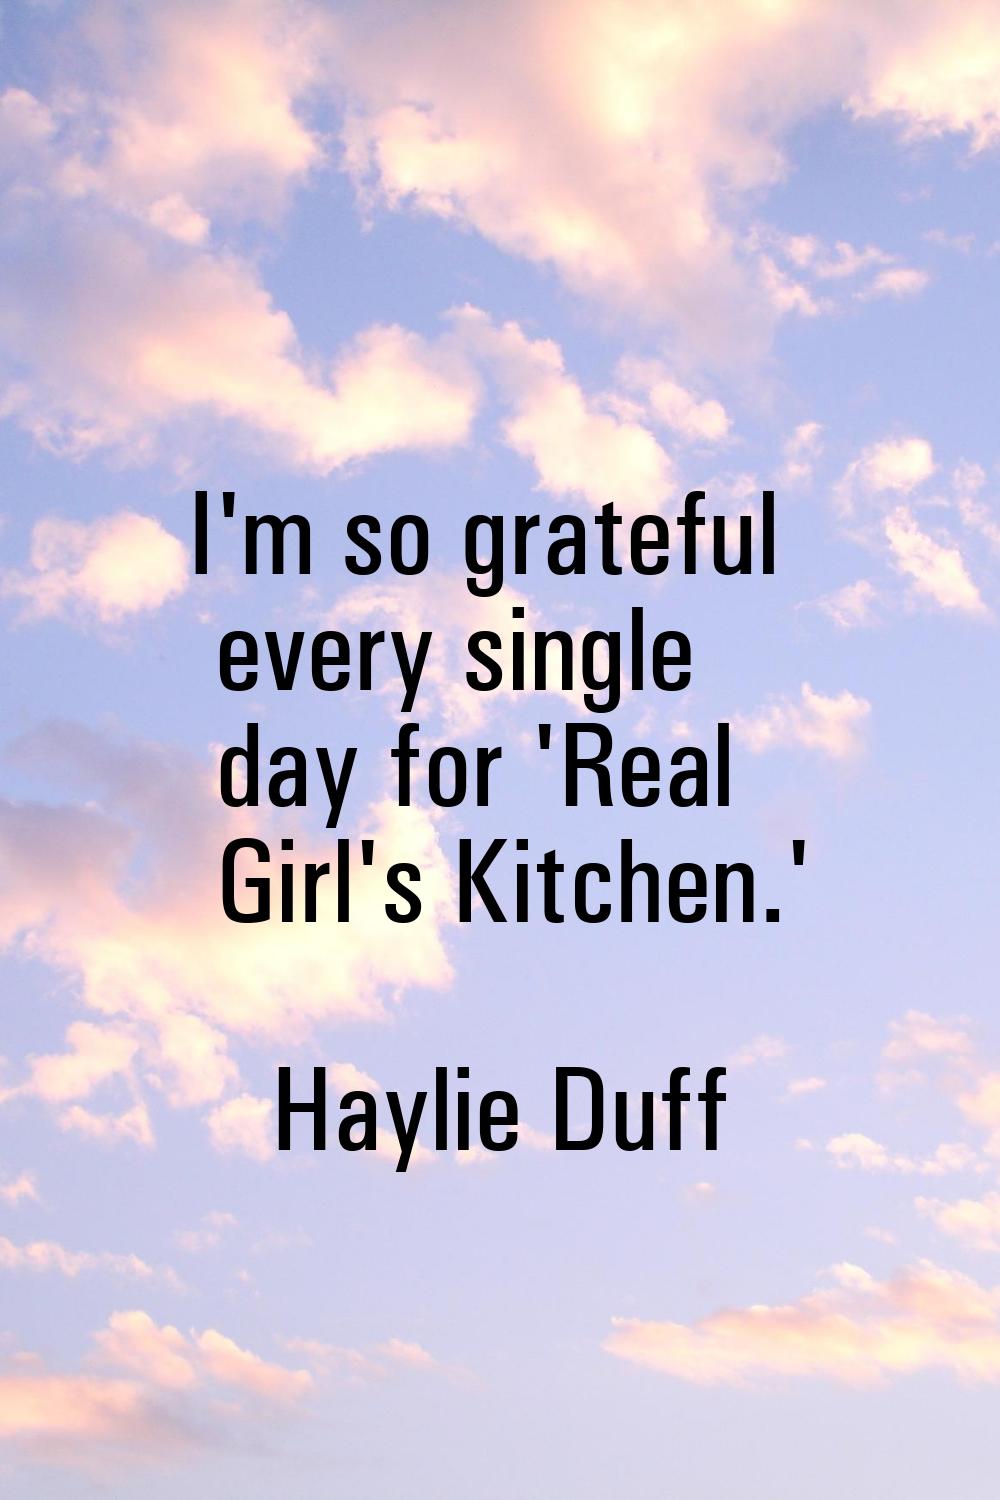 I'm so grateful every single day for 'Real Girl's Kitchen.'